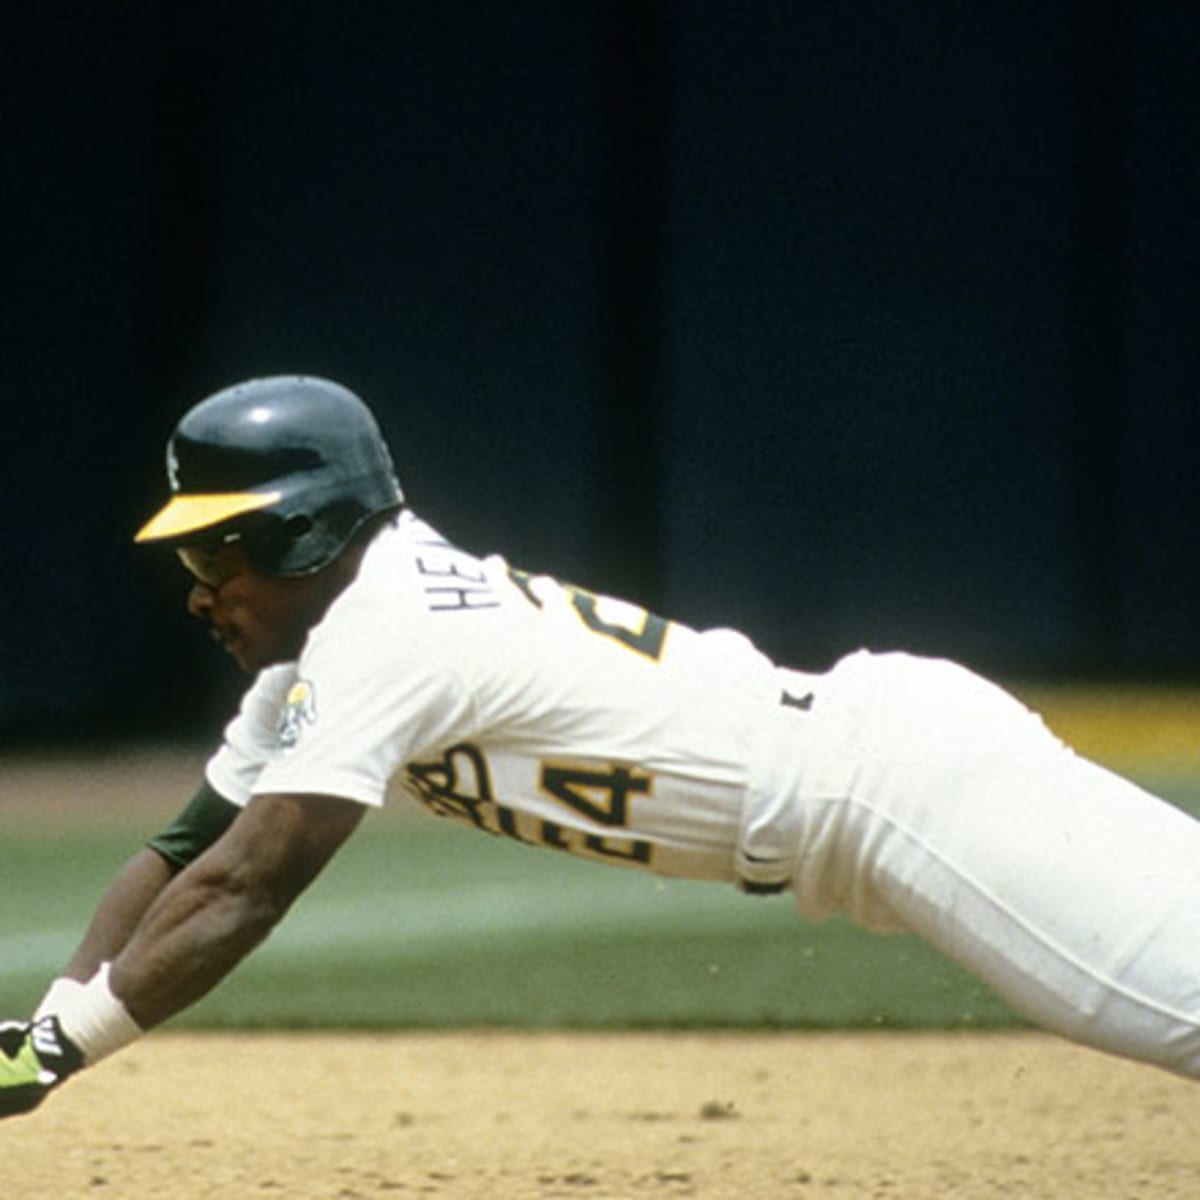 Remember: Rickey Henderson Steals Base In MLB Debut With Oakland